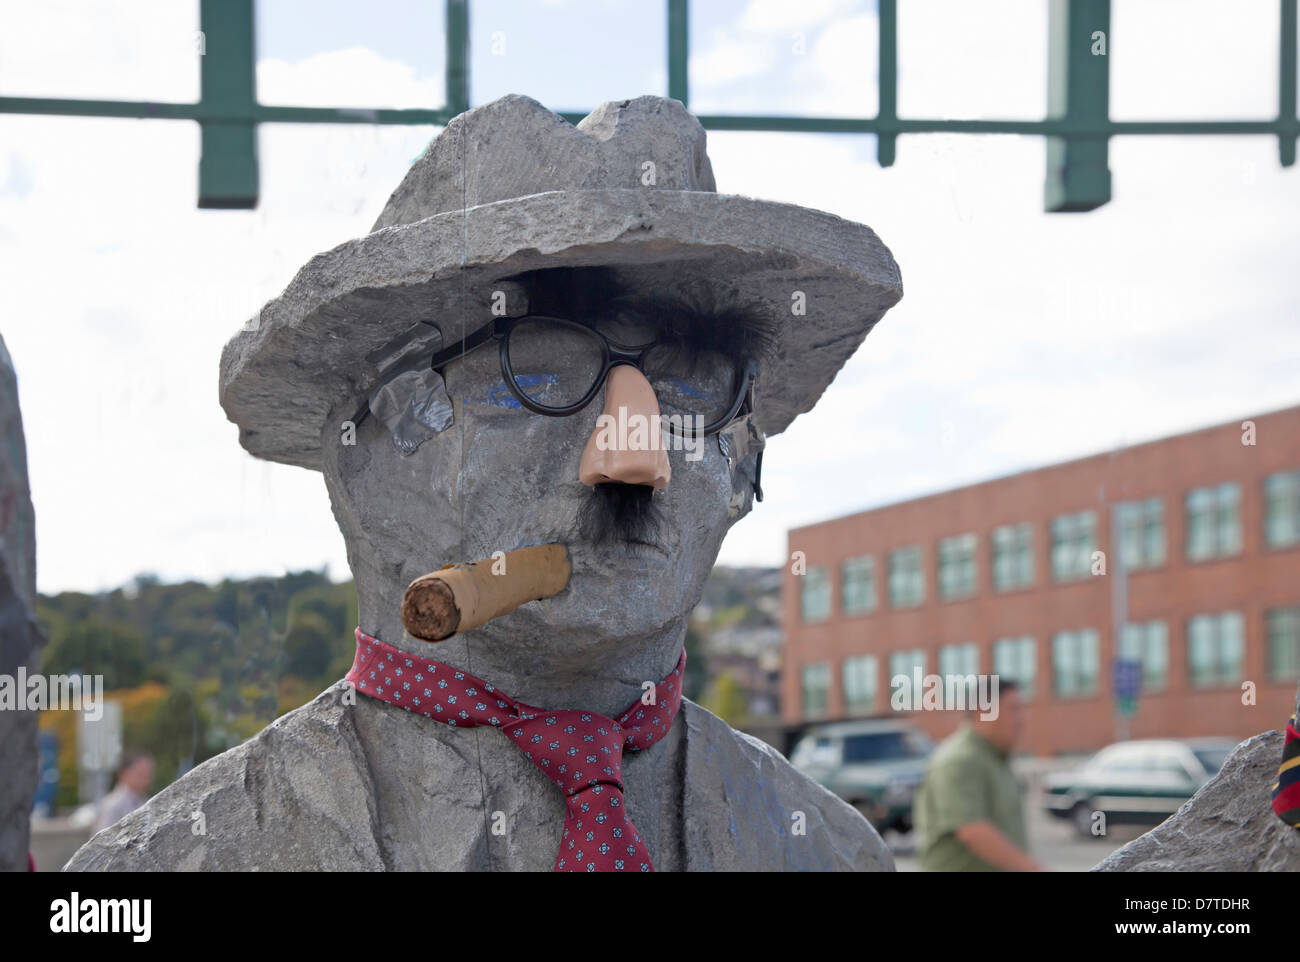 USA, Washington, Seattle, Fremont. Sculpture: 'Waiting For The Interurban', decorated for Groucho Marx' birthday. (MR) Stock Photo